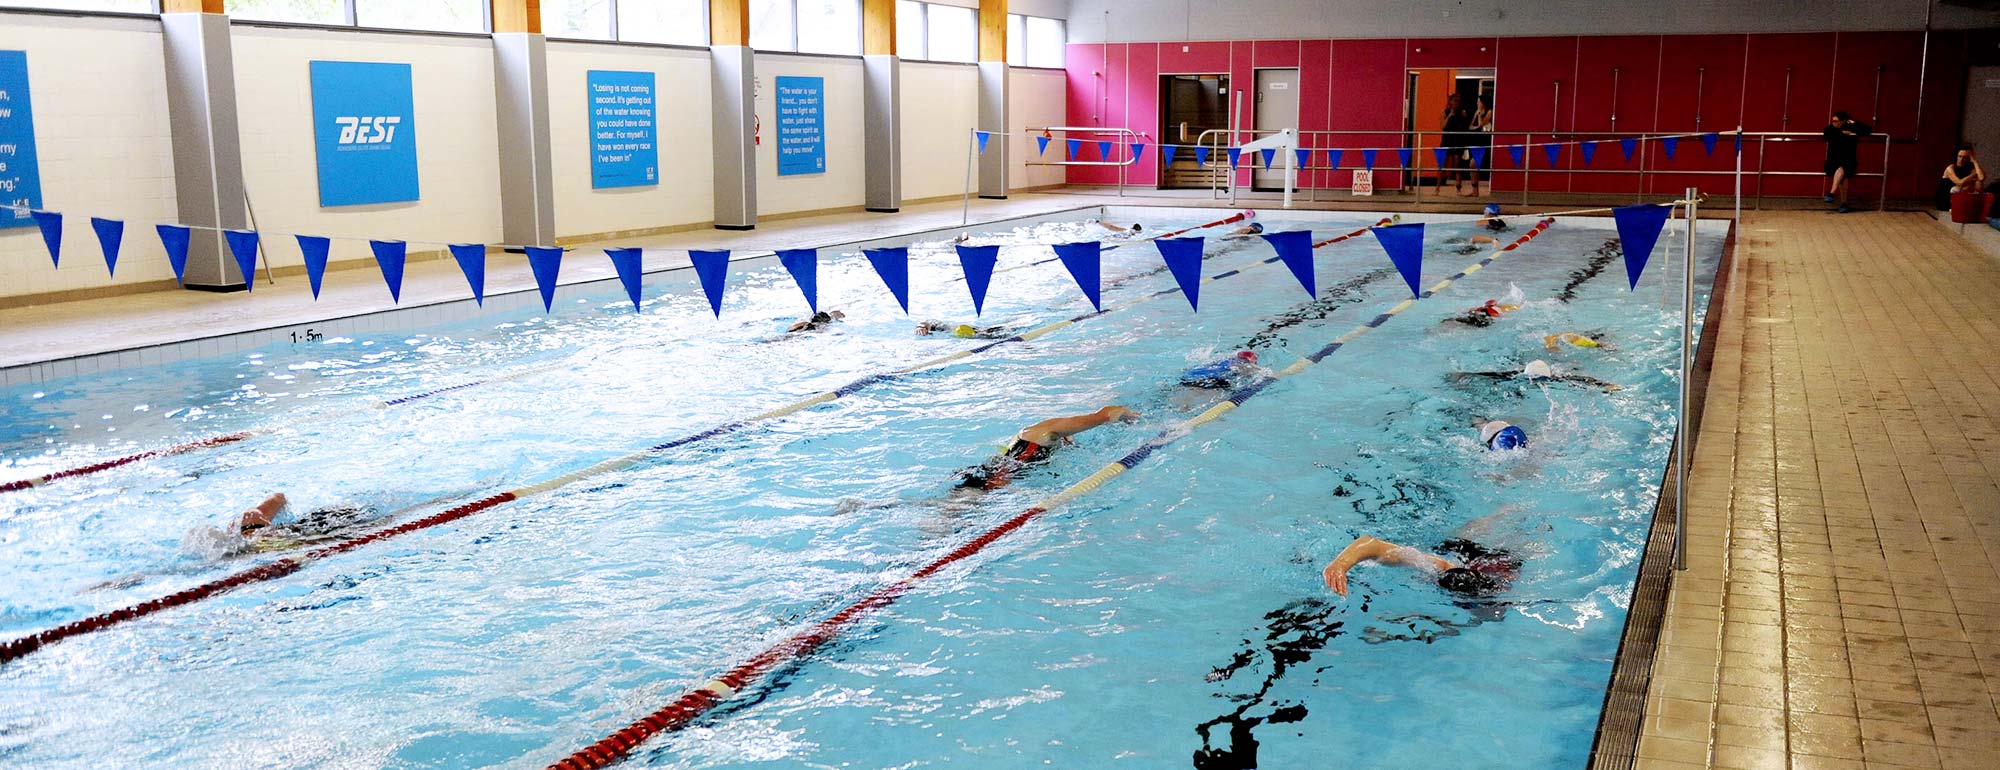 Health Swimming Pools Selkirk Leisure Centre 1 